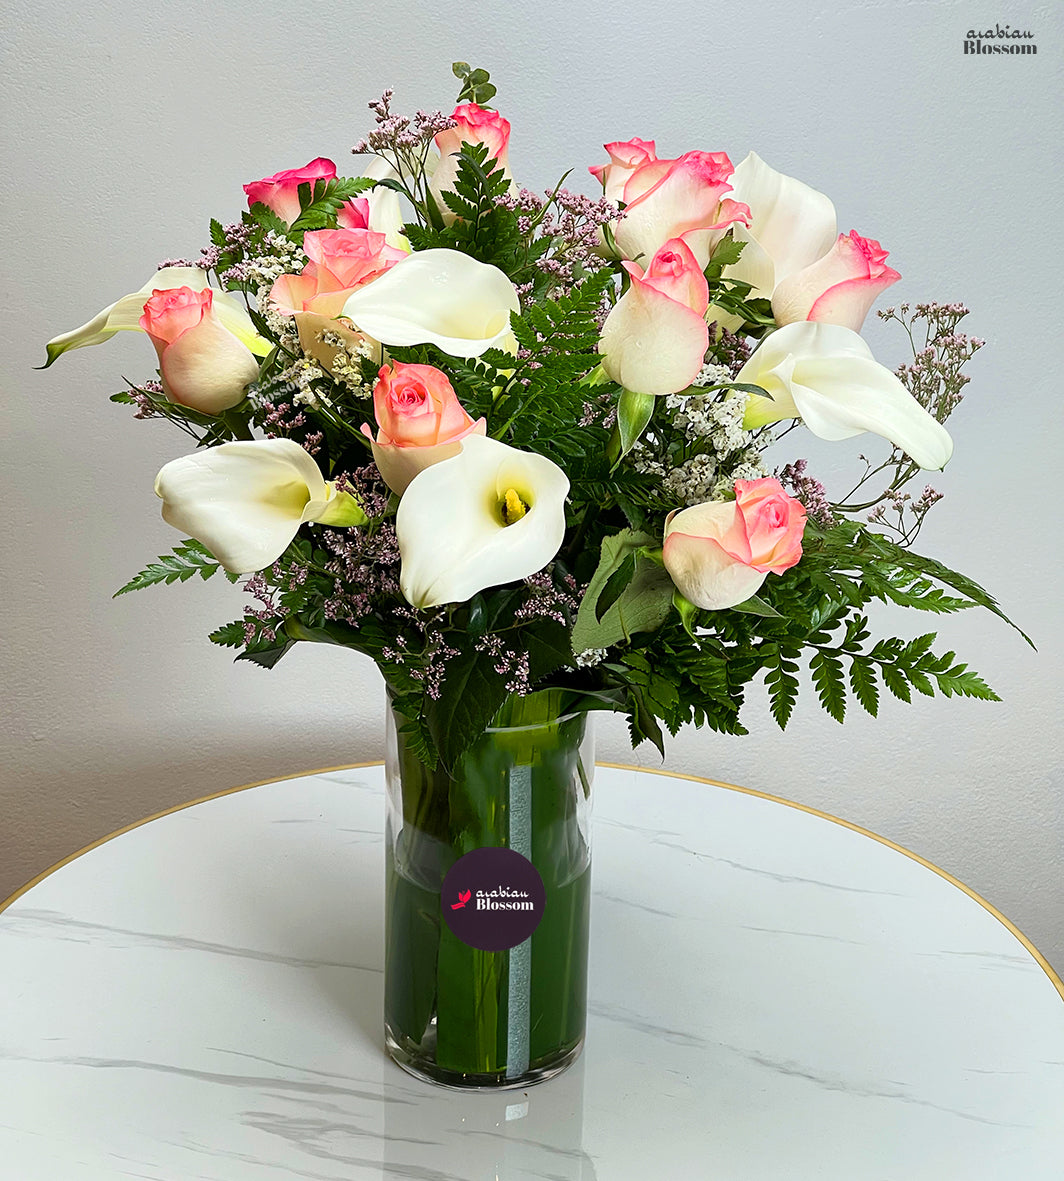 Roses and Calla Lilies Bloom